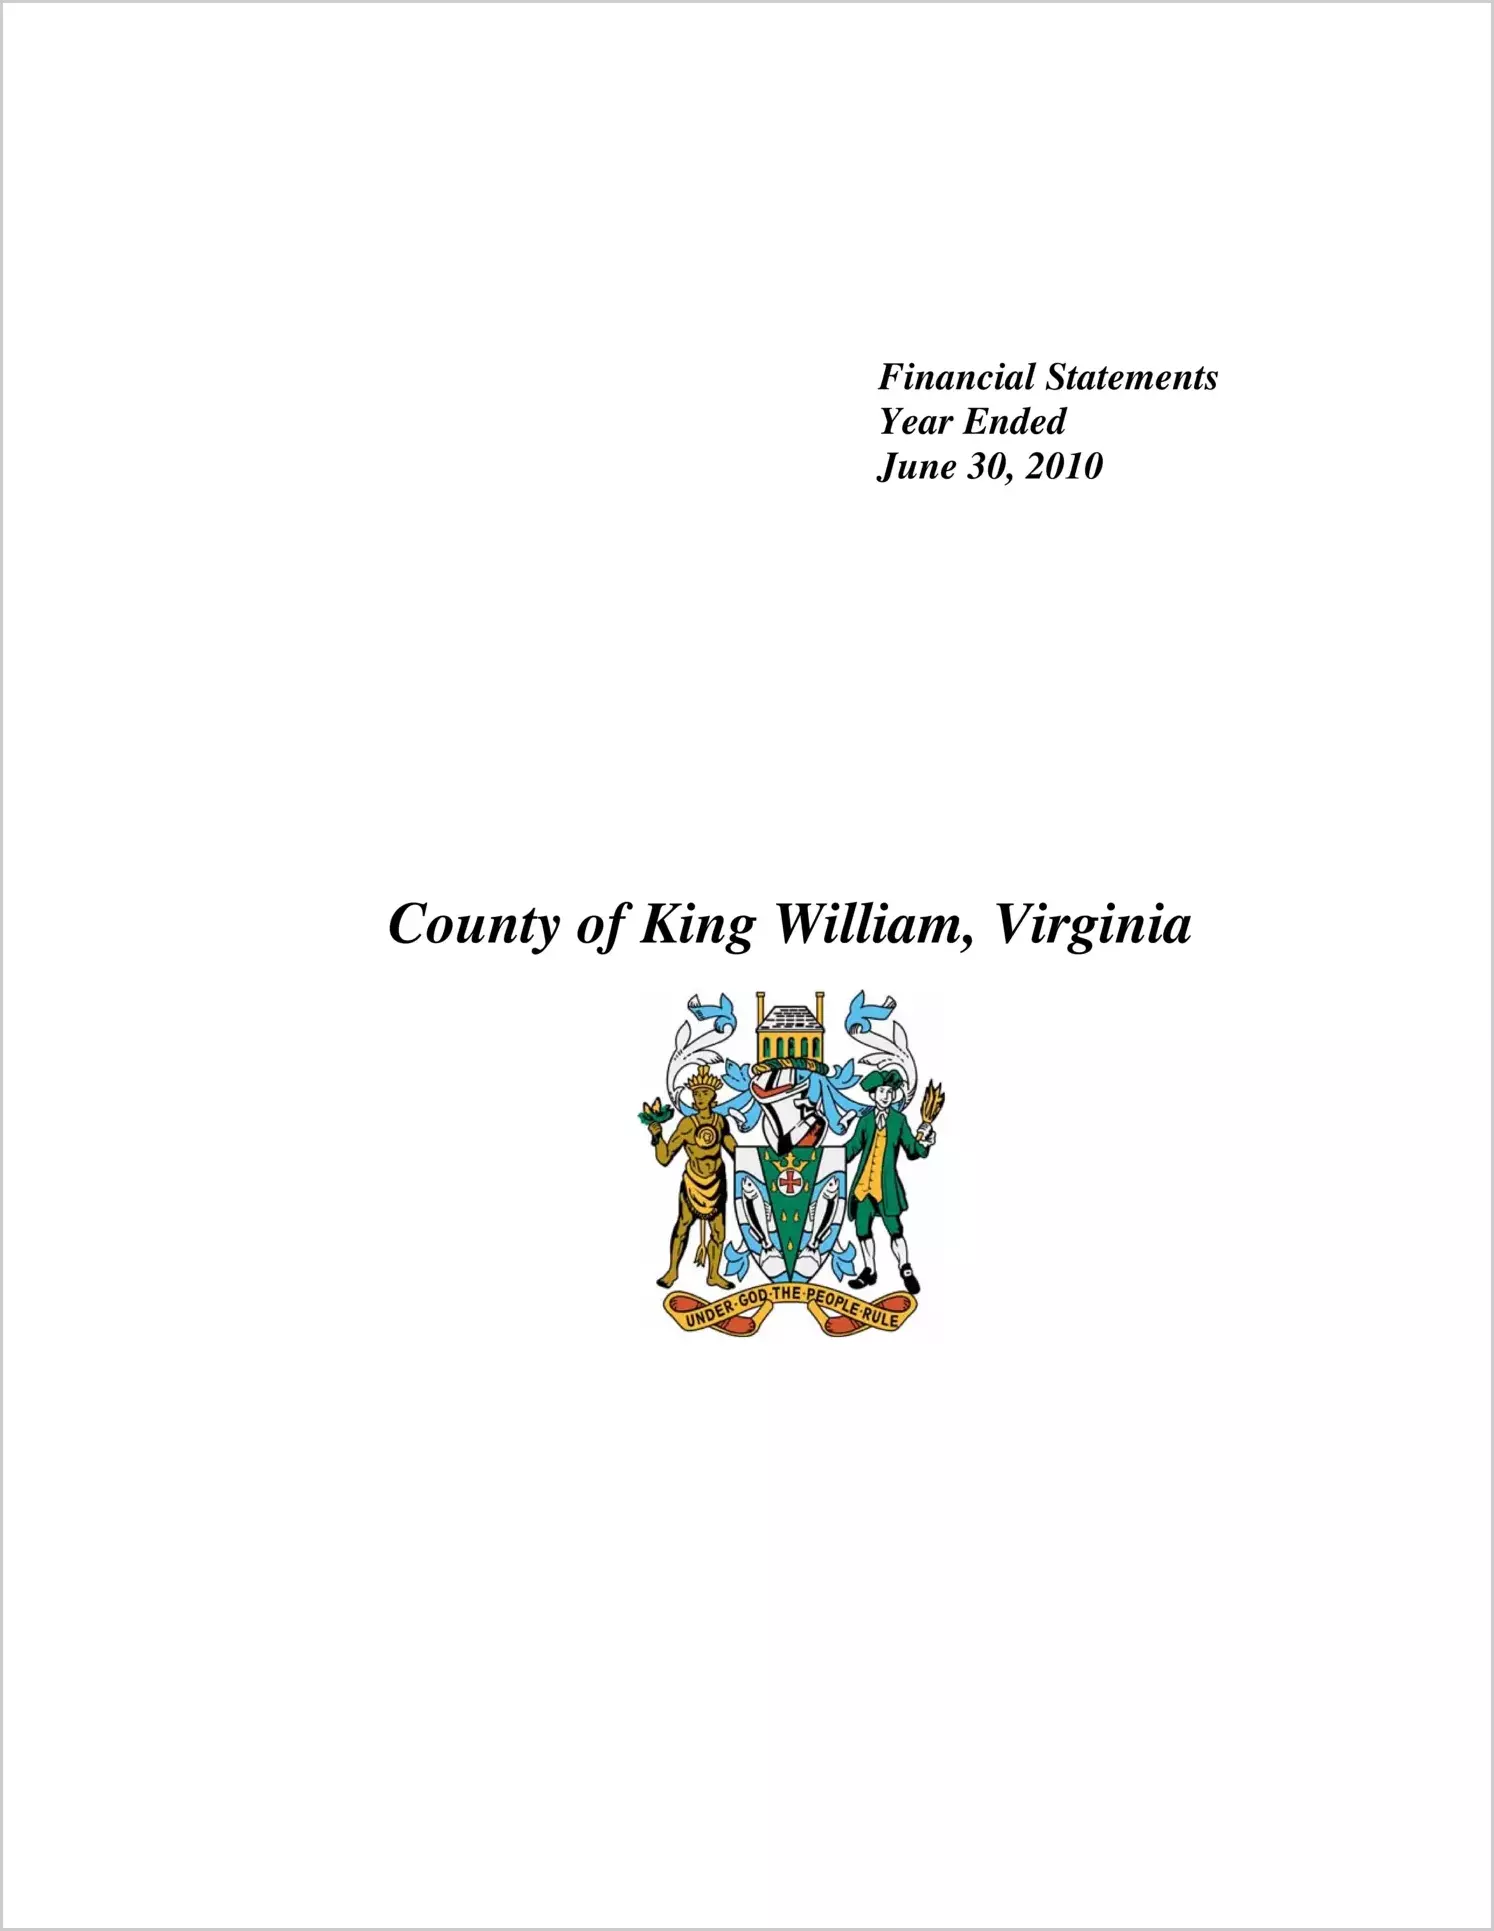 2010 Annual Financial Report for County of King William